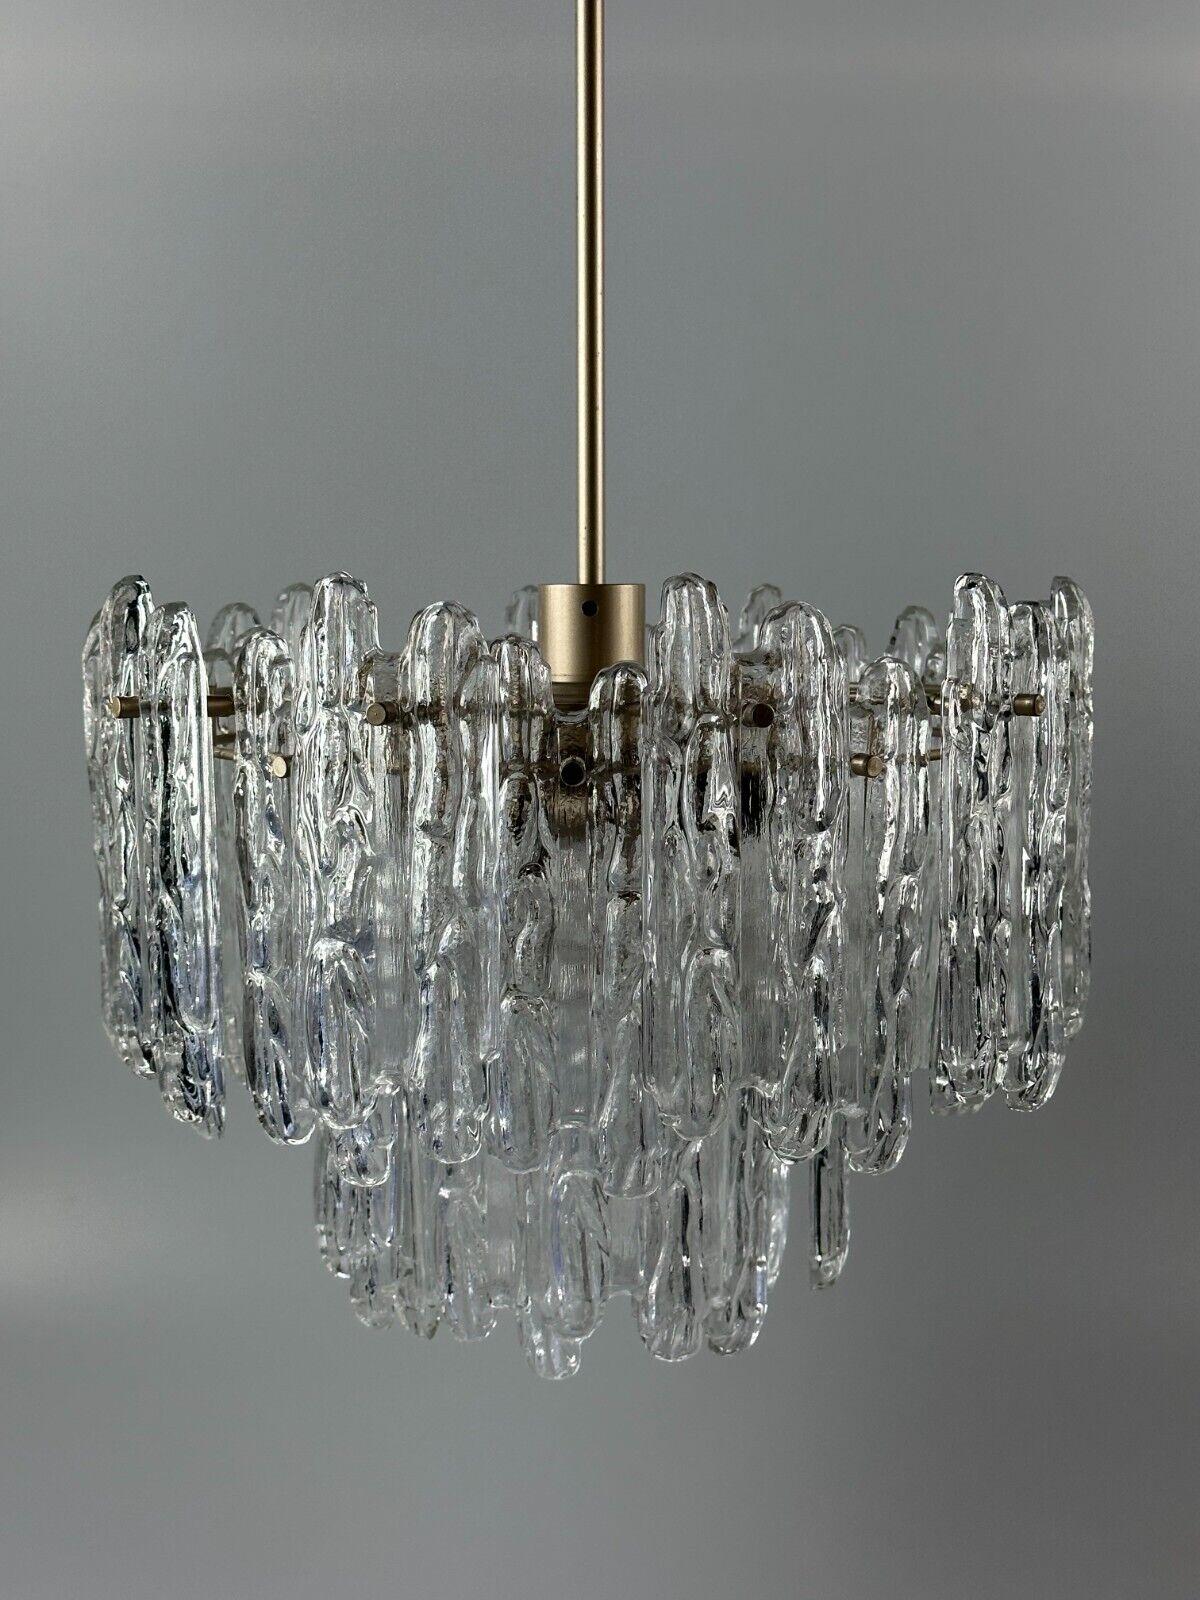 60s 70s ceiling lamp chandelier Kinkeldey Germany Space Age glass design In Good Condition For Sale In Neuenkirchen, NI